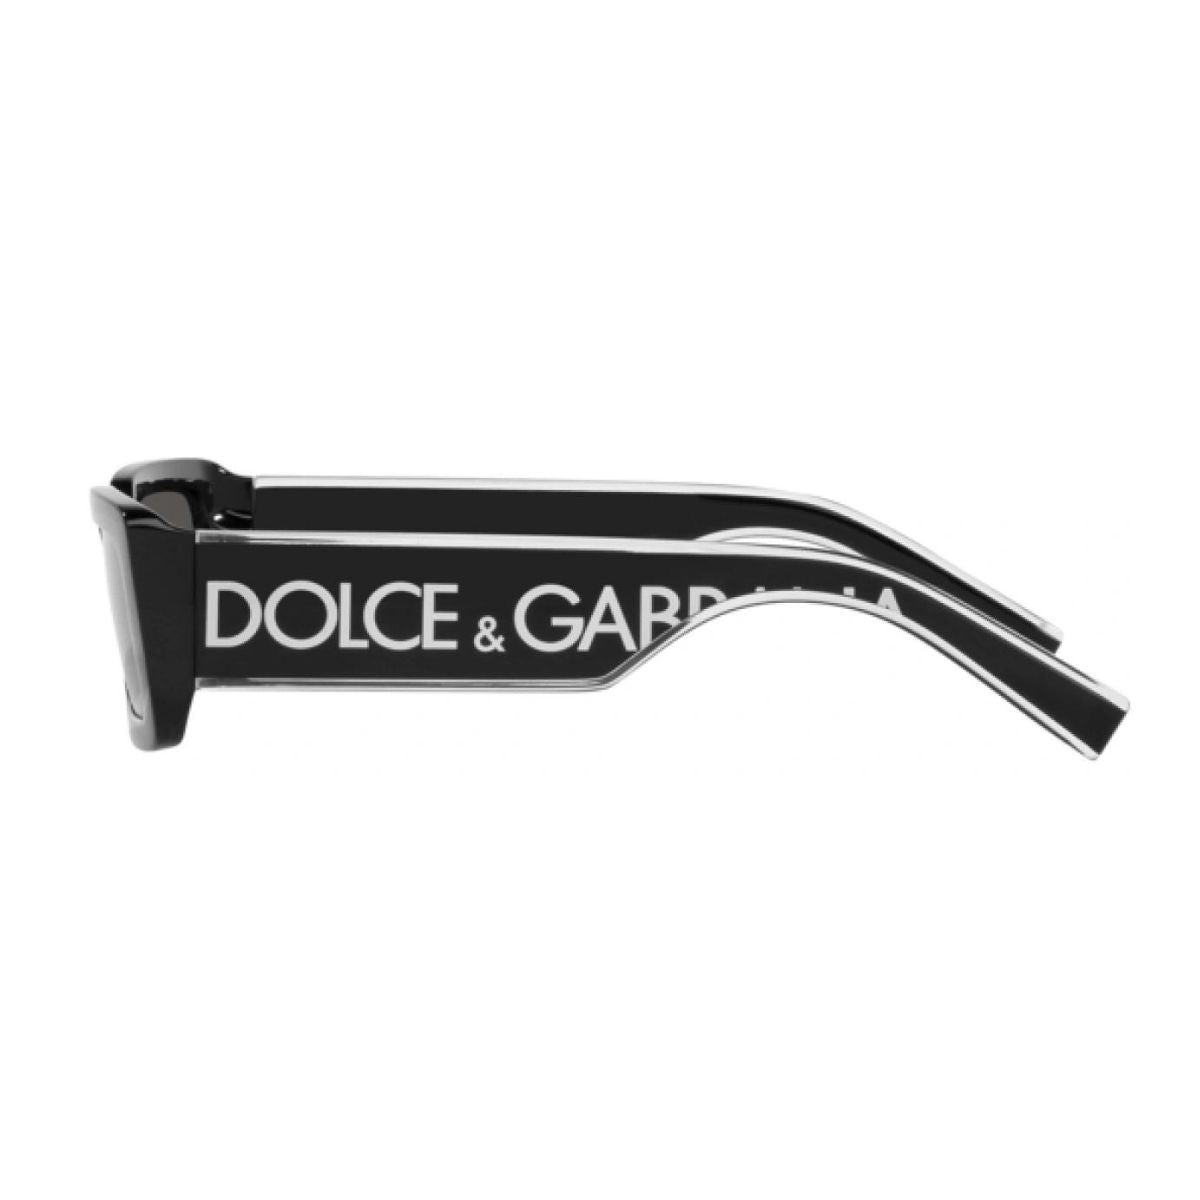 "Stylish Dolce & Gabbana DG6187 501/87 Stylish sunglasses with logo on the side, perfect for men and women."